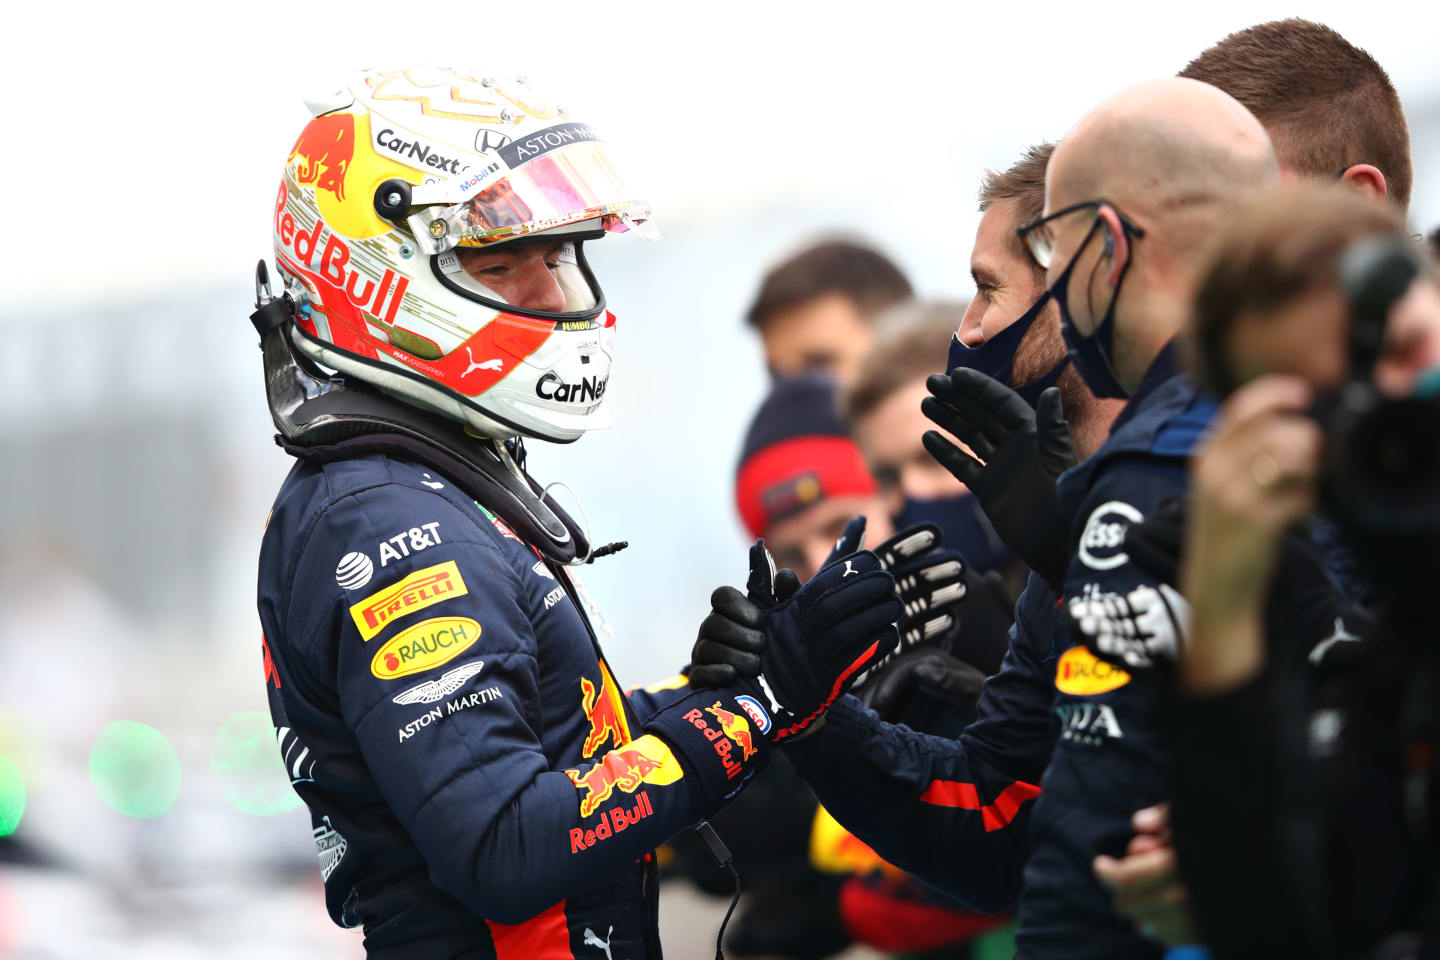 NUERBURG, GERMANY - OCTOBER 11: Second placed Max Verstappen of Netherlands and Red Bull Racing